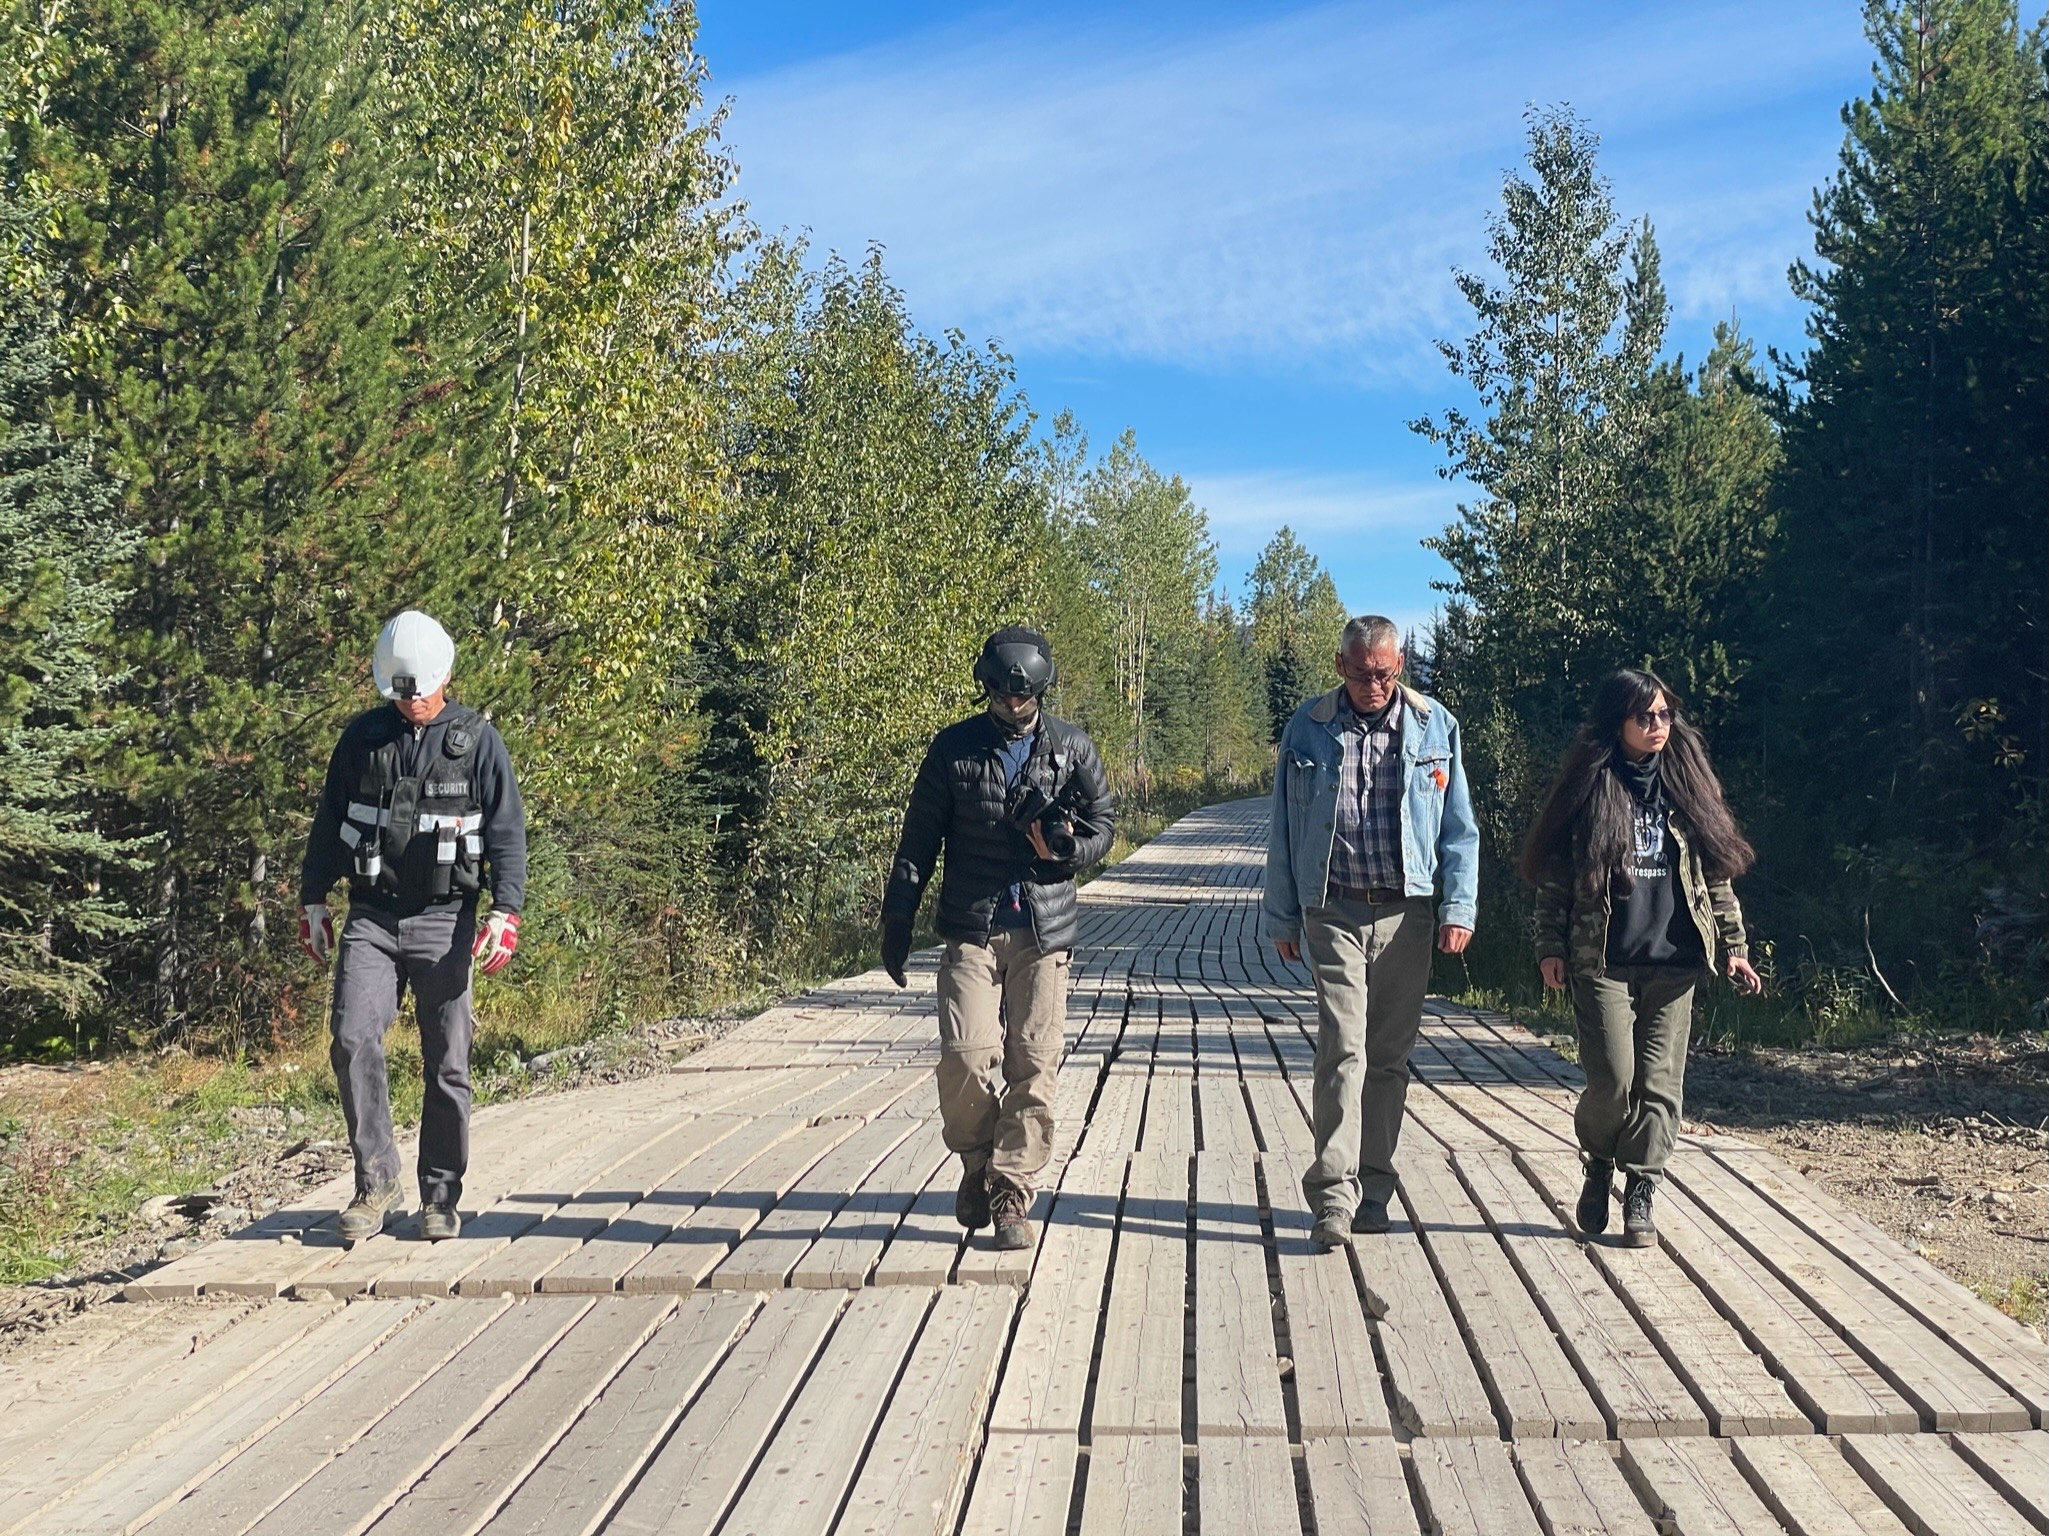 Hereditary Chief Namox walks with Jocey Alec, daughter of Gidimt’en Clan Hereditary Chief Woos along with Coastal GasLink security guards to view Coastal GasLink drilling under the Wedzin Kwa (Morice River)